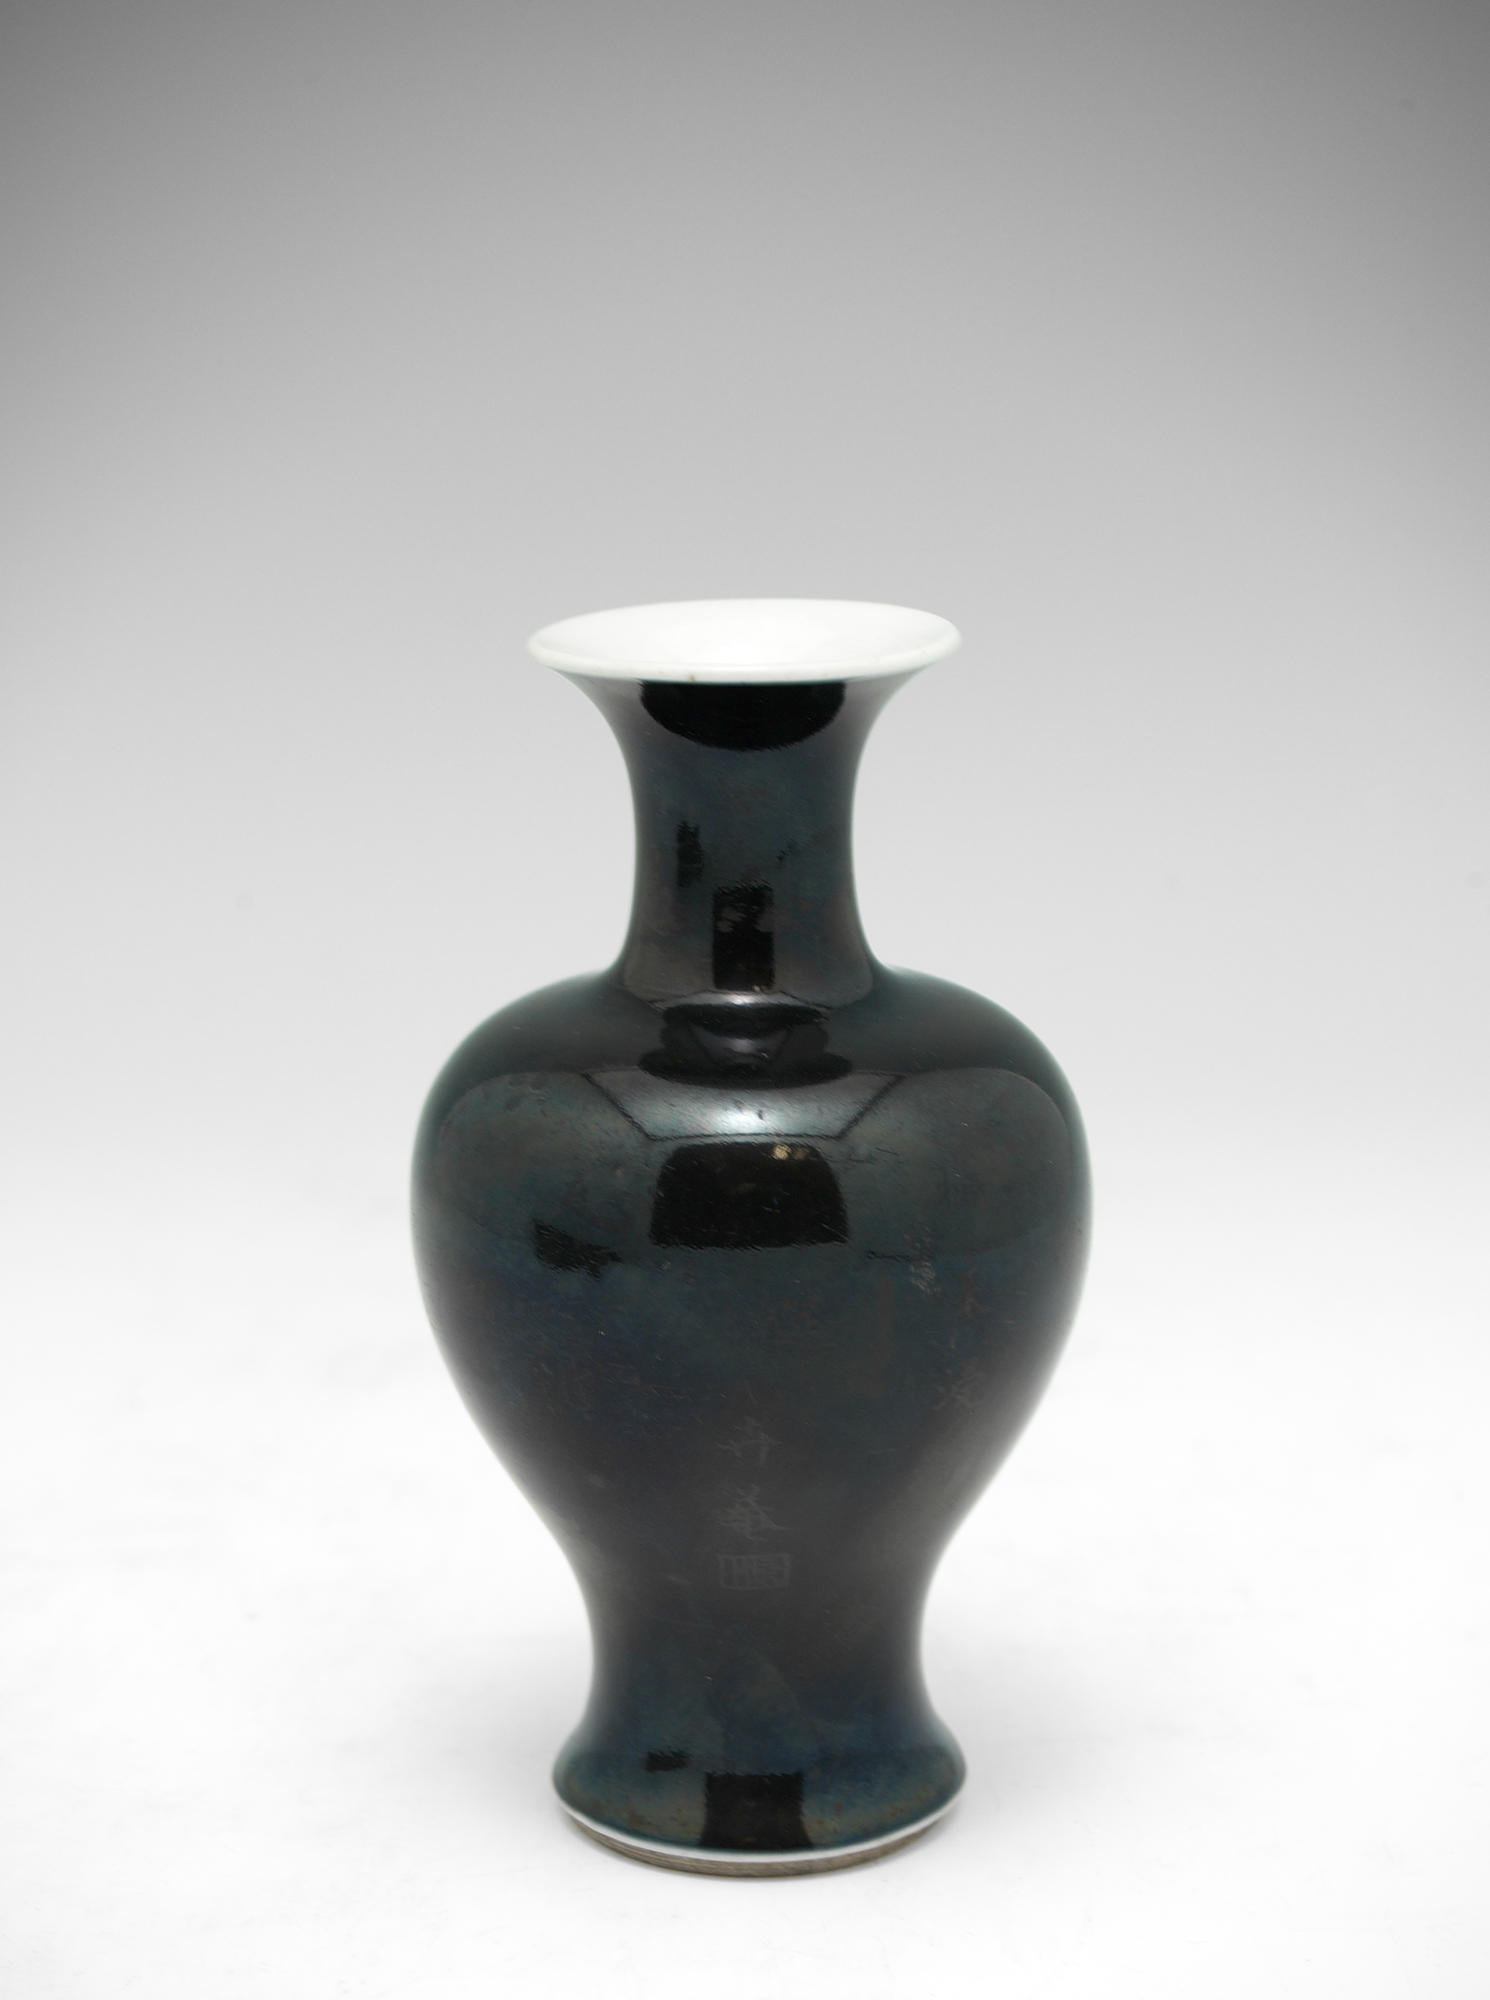 A black vase, taller than it is wide, with a rim that turns outward, a short neck, and a broad shoulder that curves to a narrow base with traces of gold characters. 